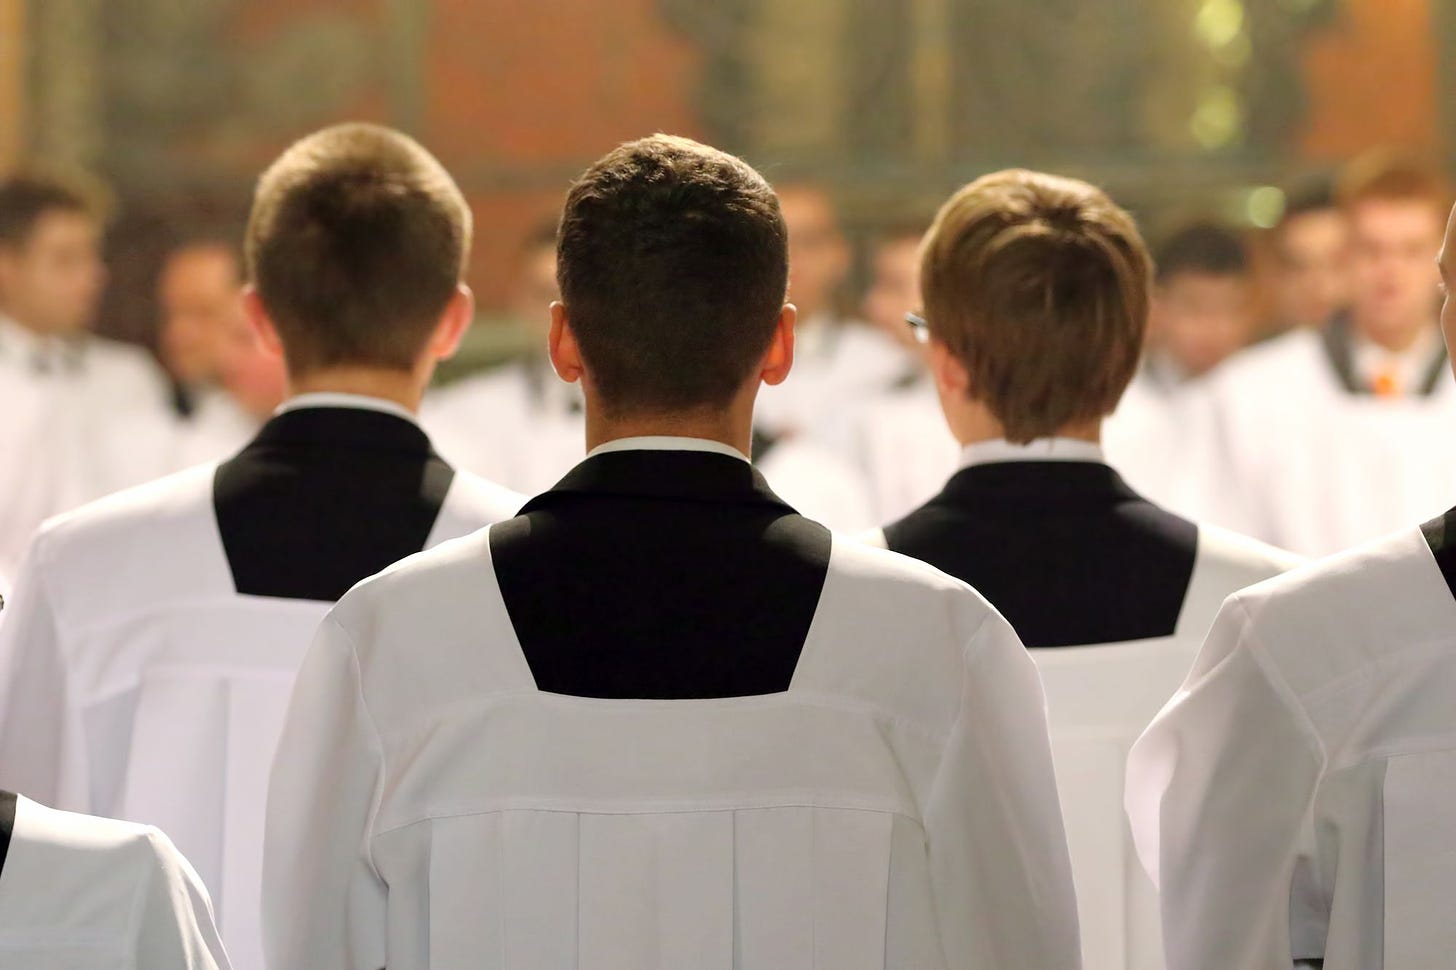 Seeing 'red flags' - Is there transparency for troubled religious orders?